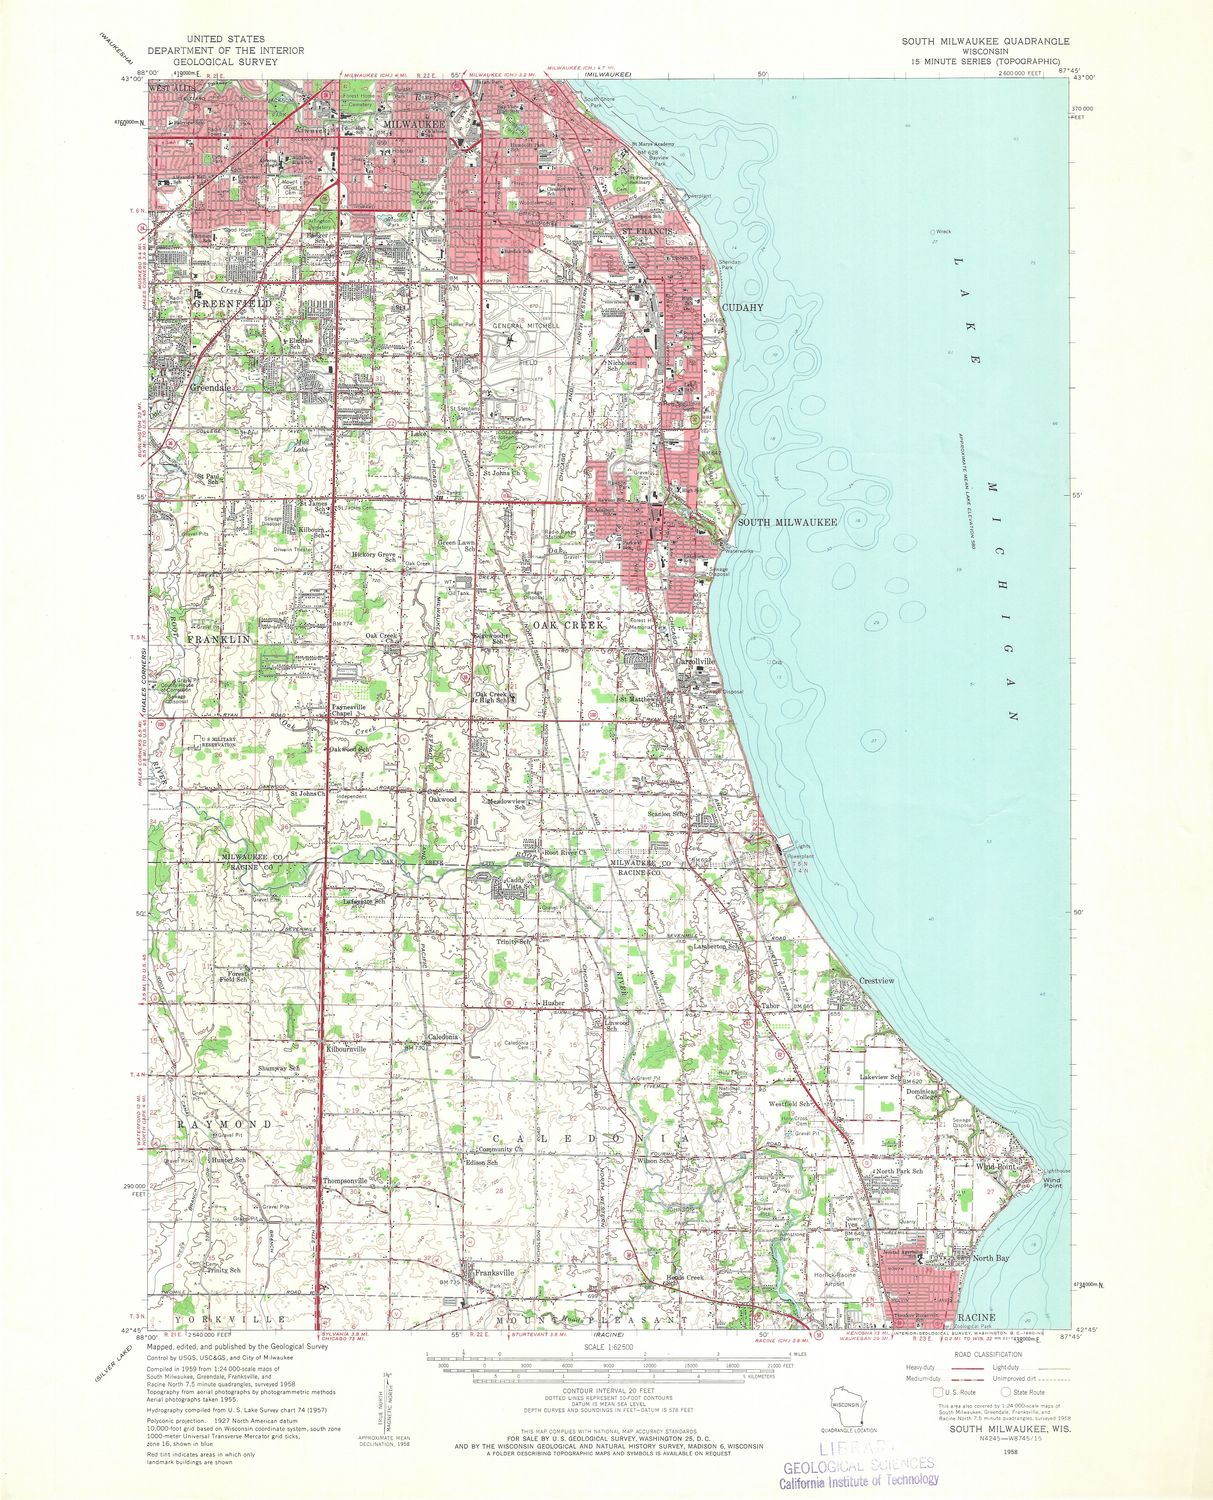 1958 USGS Milwaukee , Wis. in 3 sheets